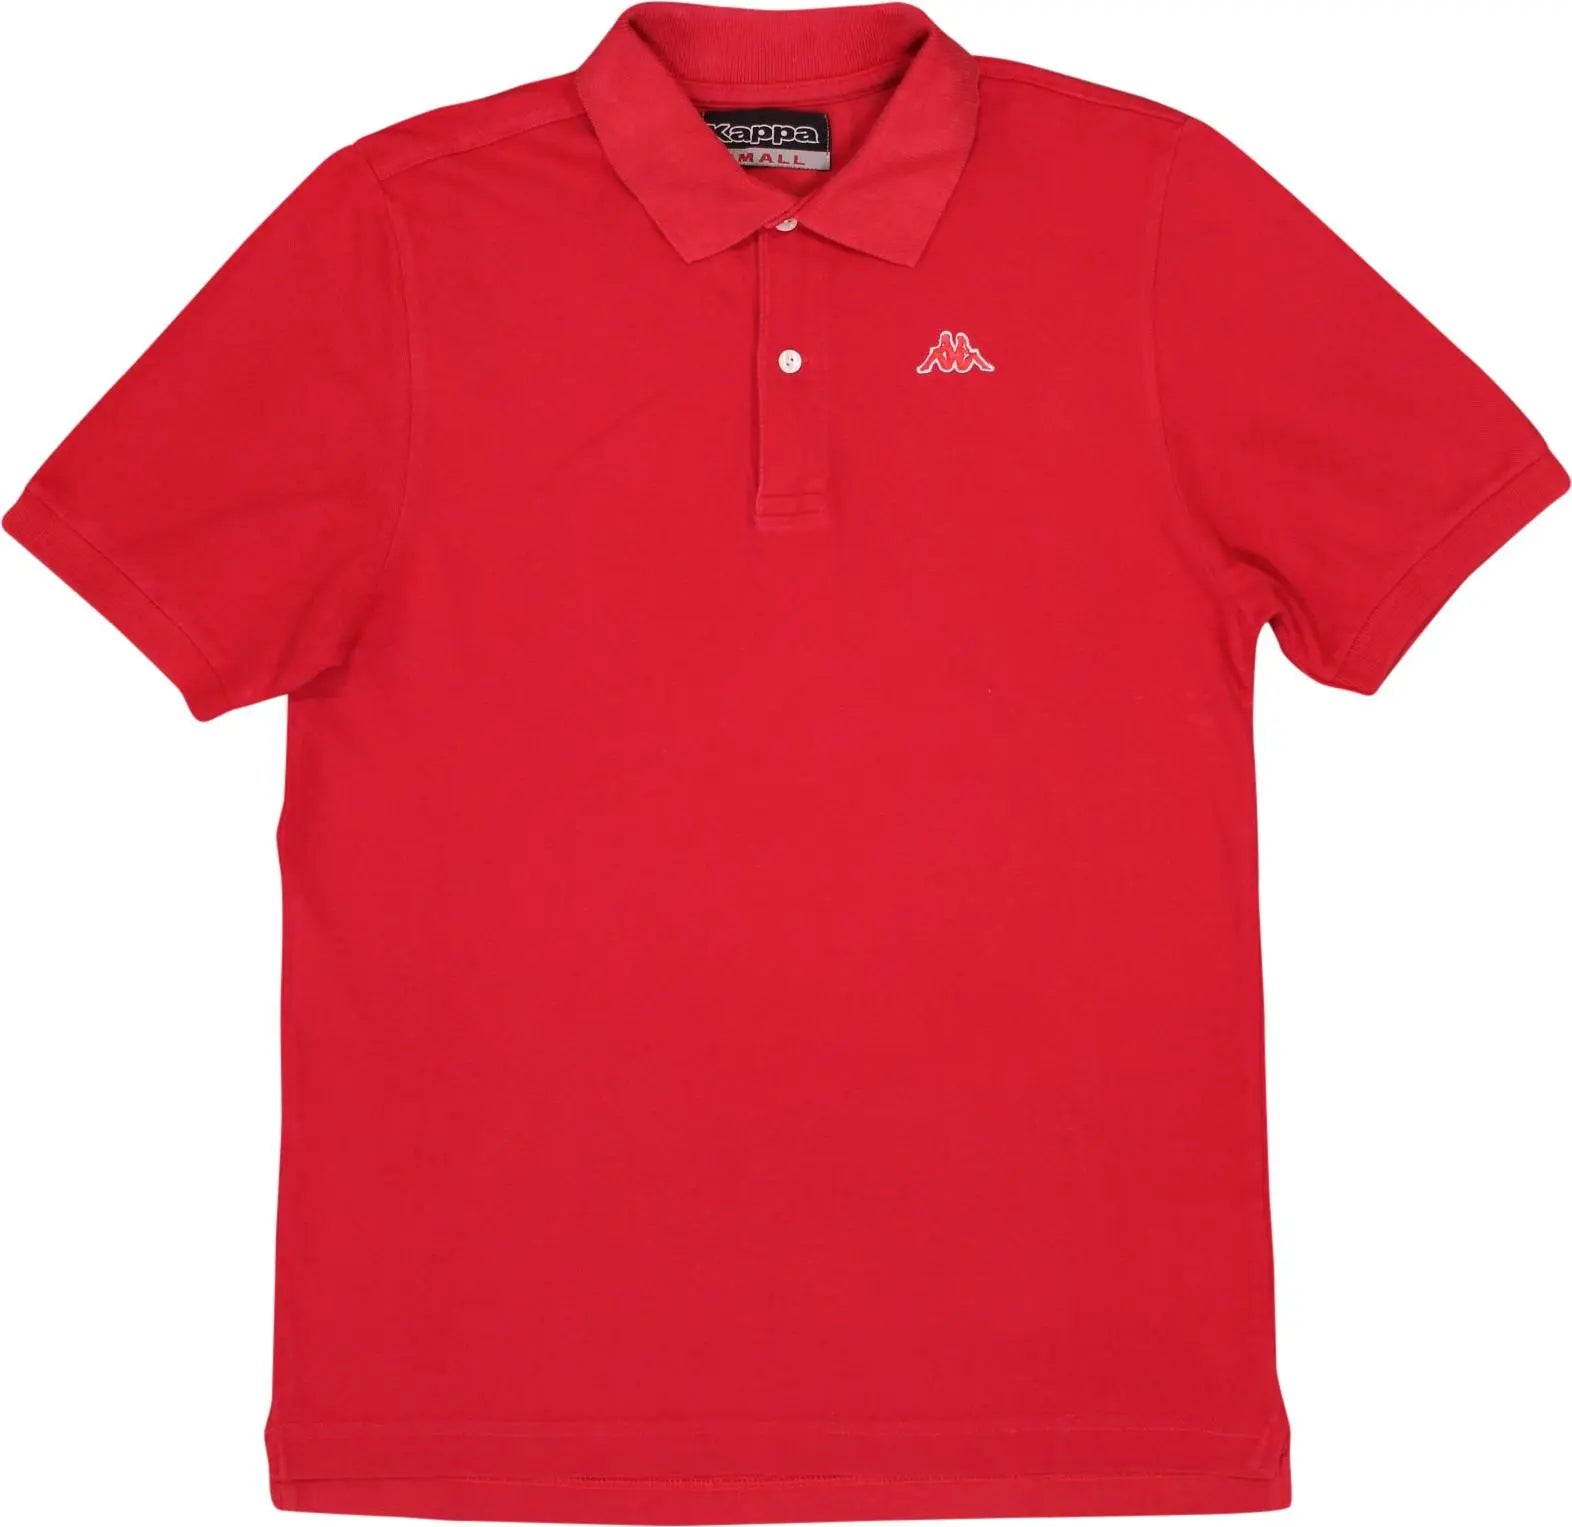 Kappa - Red Polo Shirt by Kappa- ThriftTale.com - Vintage and second handclothing